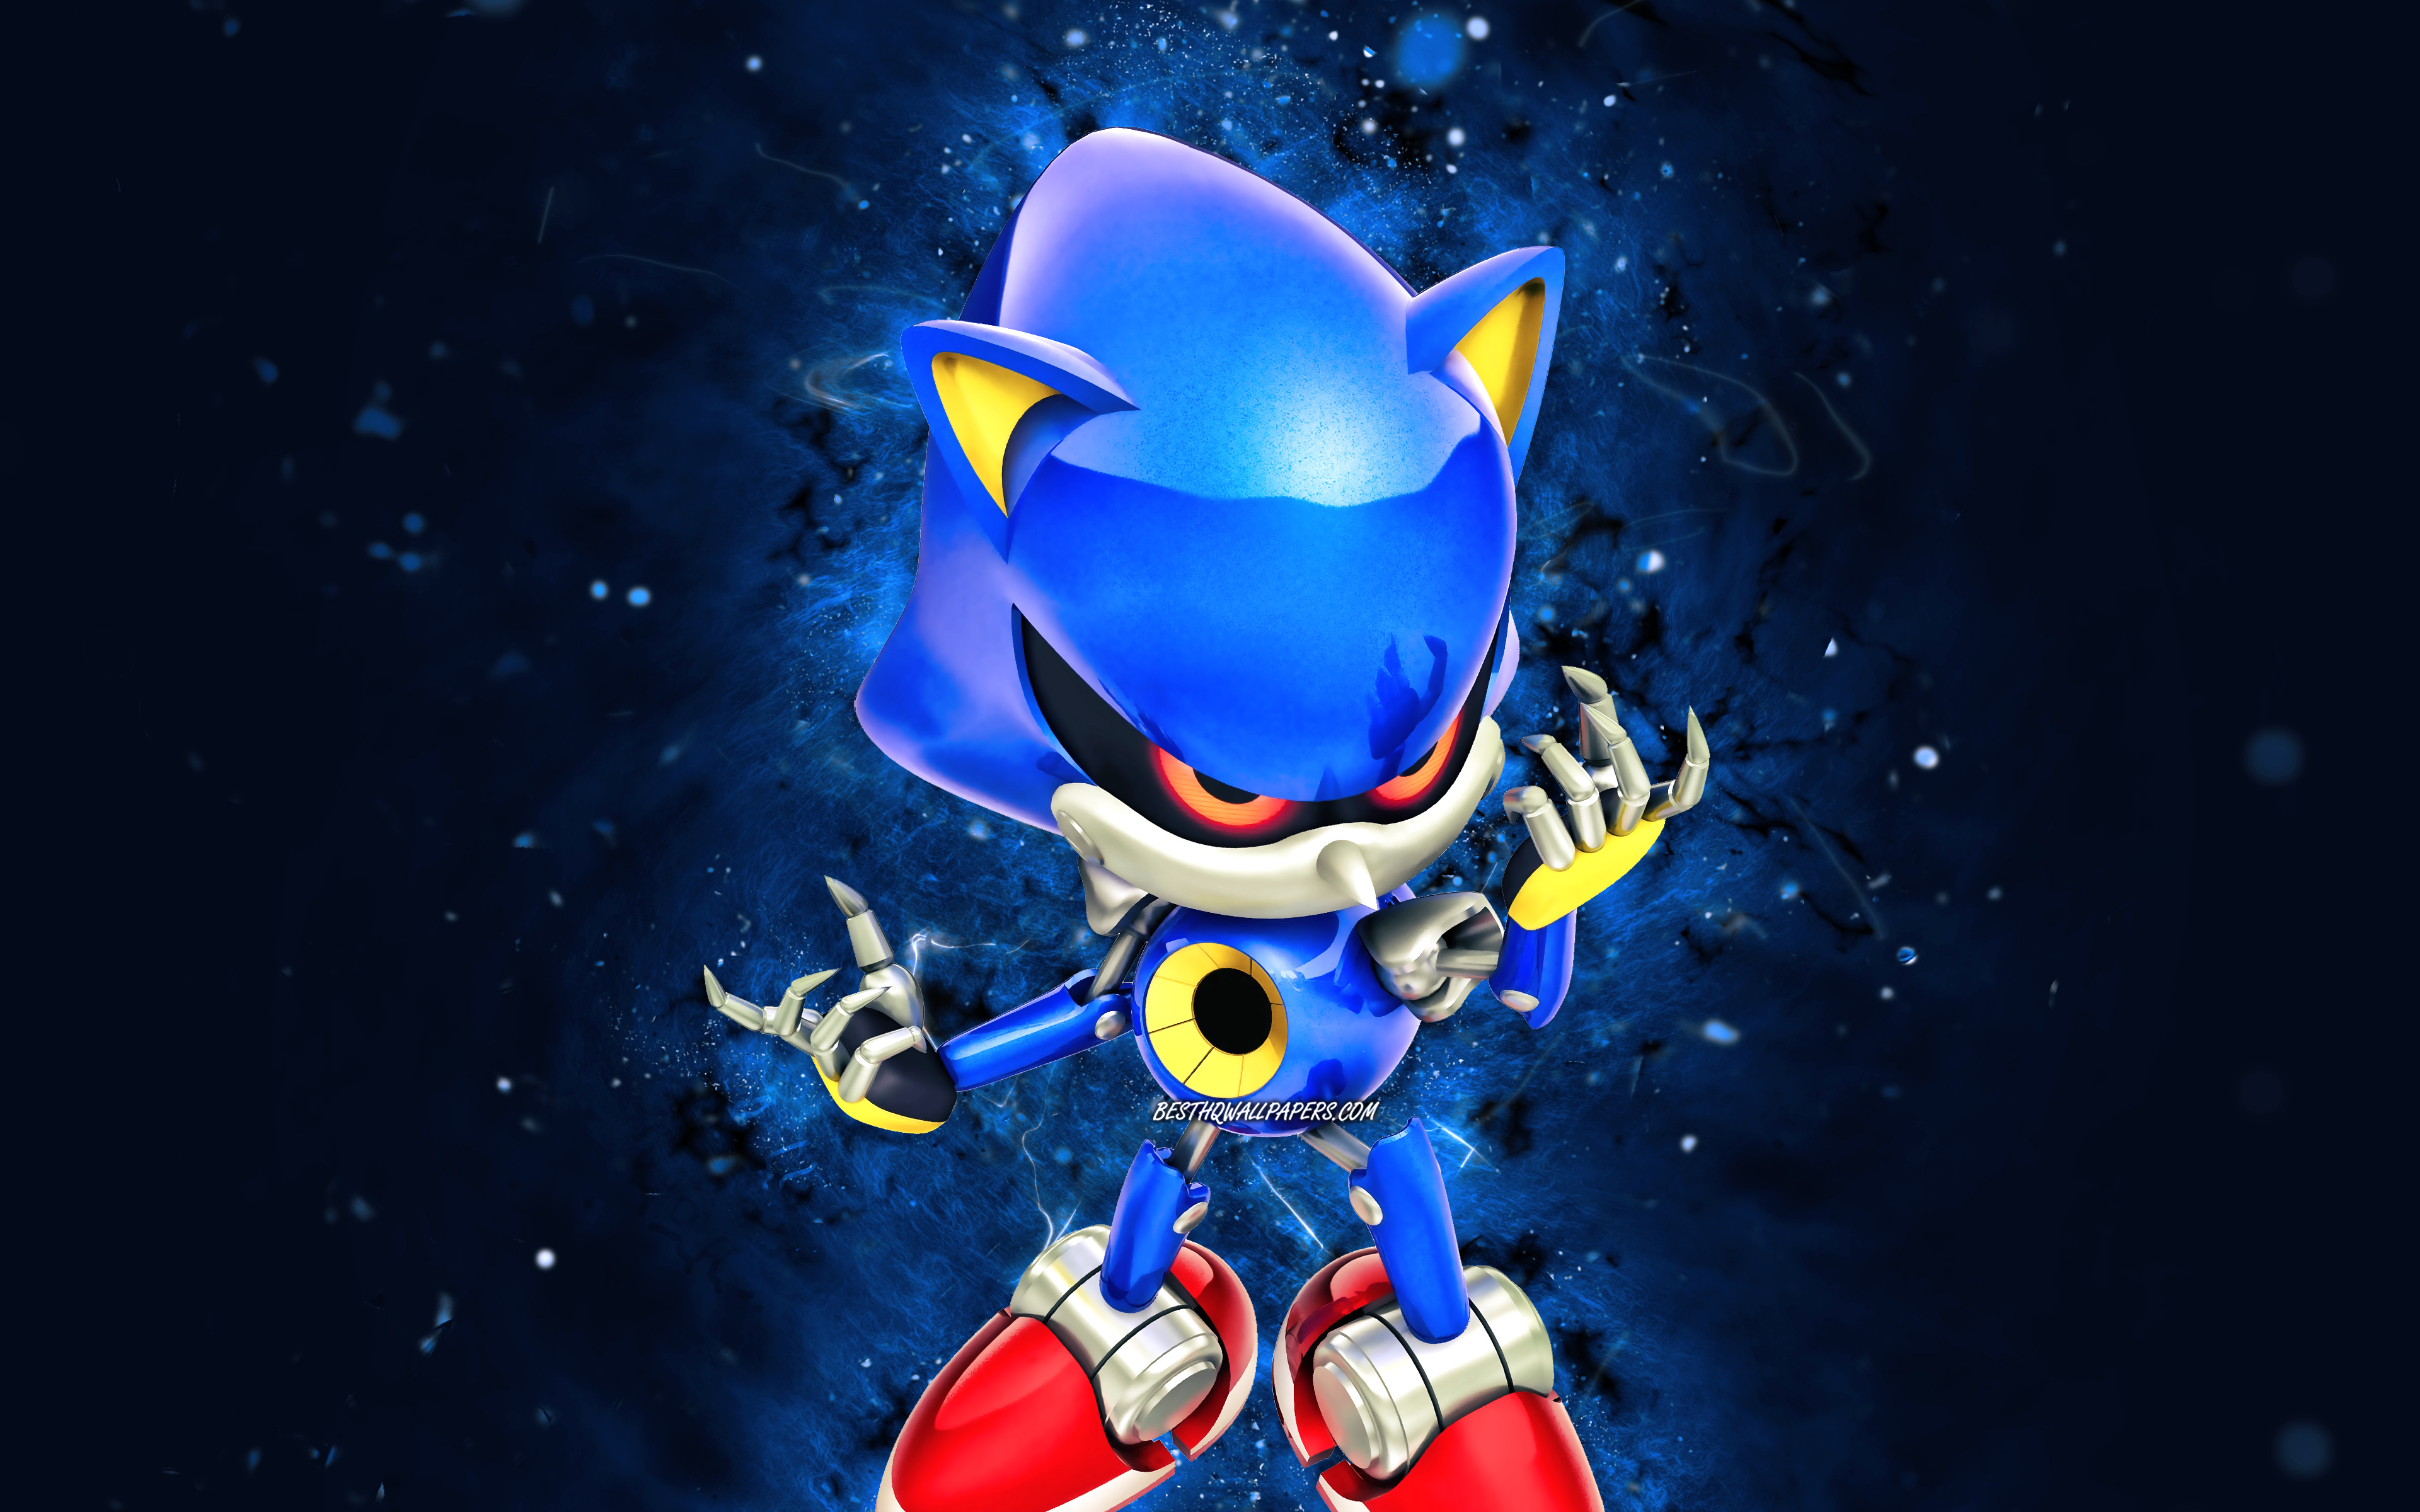 Download wallpaper Metal Sonic the Hedgehog, 4K, blue neon lights, Sonic Underground, Blue Sonic, creative, Metal Sonic the Hedgehog 4K for desktop with resolution 3840x2400. High Quality HD picture wallpaper